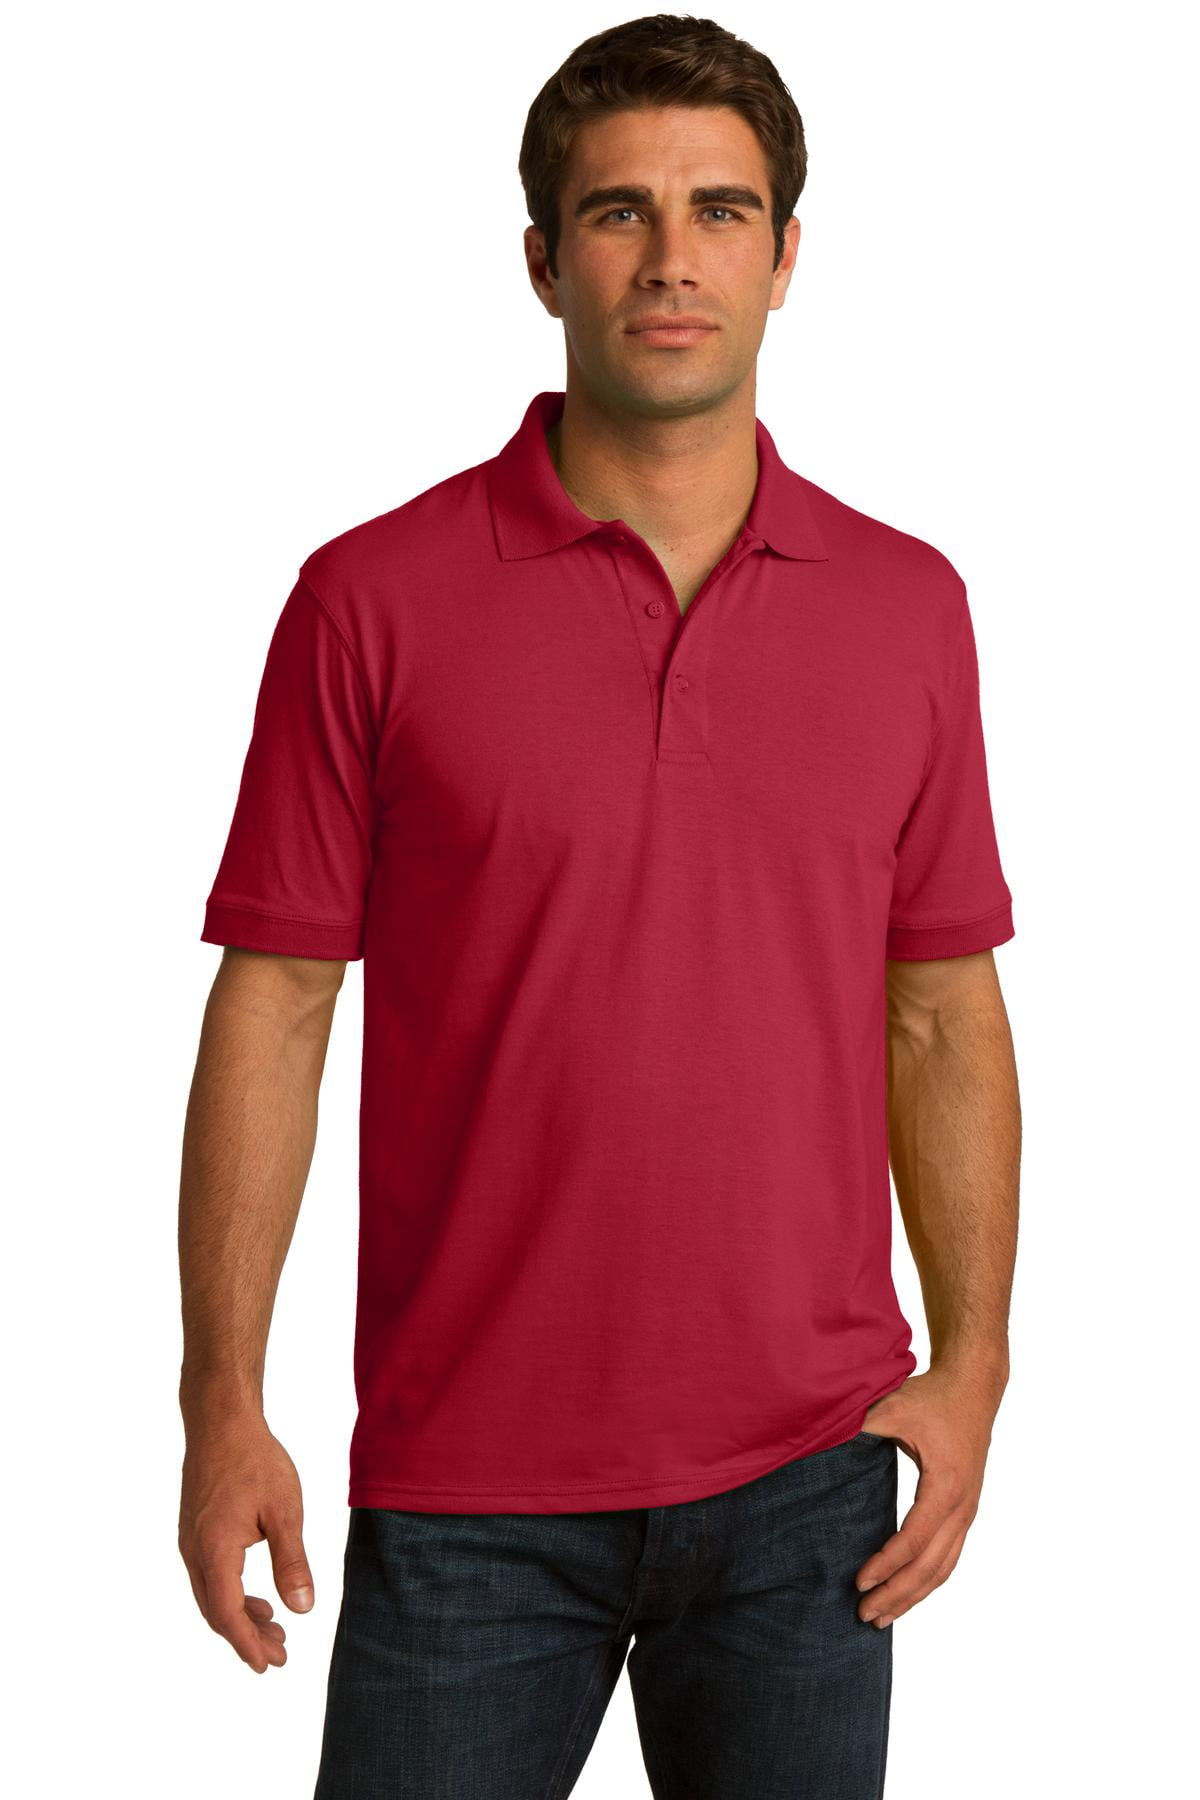 Port Company Tall 5 5 Ounce Jersey Knit Polo Kp55T Athletic Heather